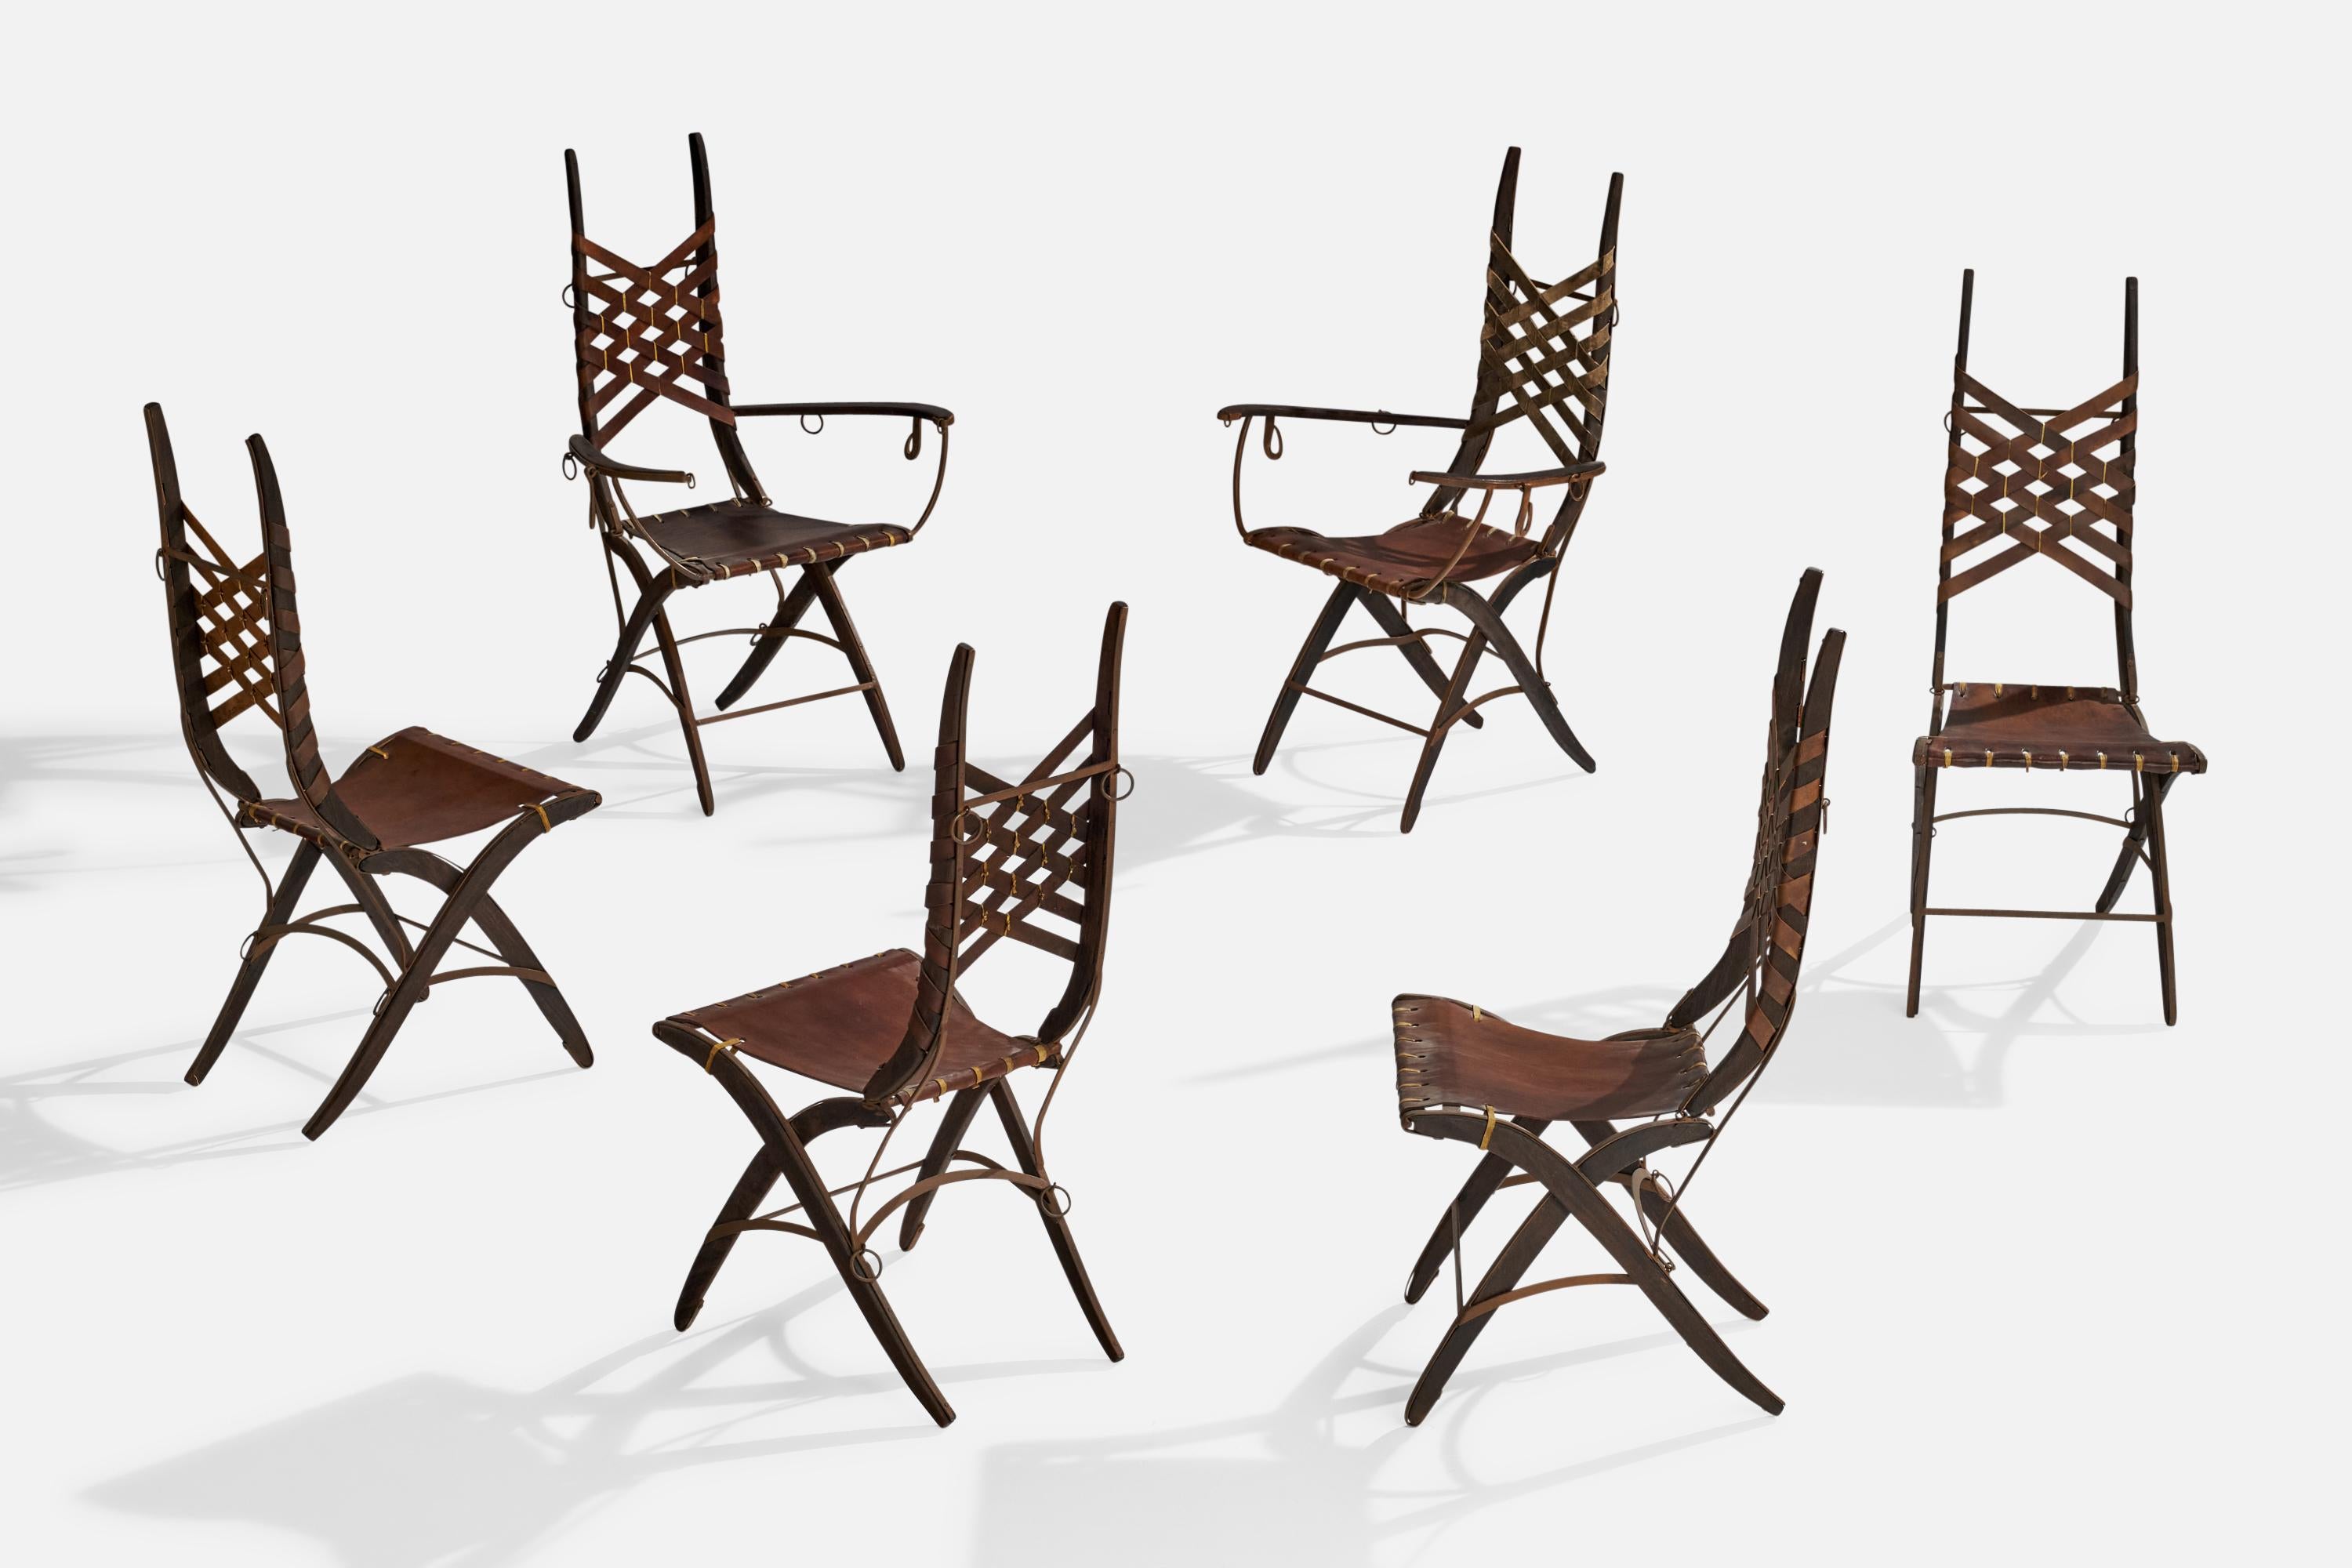 A set of 6 iron oak and brown leather dining chairs designed and produced by Alberto Marconetti, Italy, 1960s.

Seat height 18”.